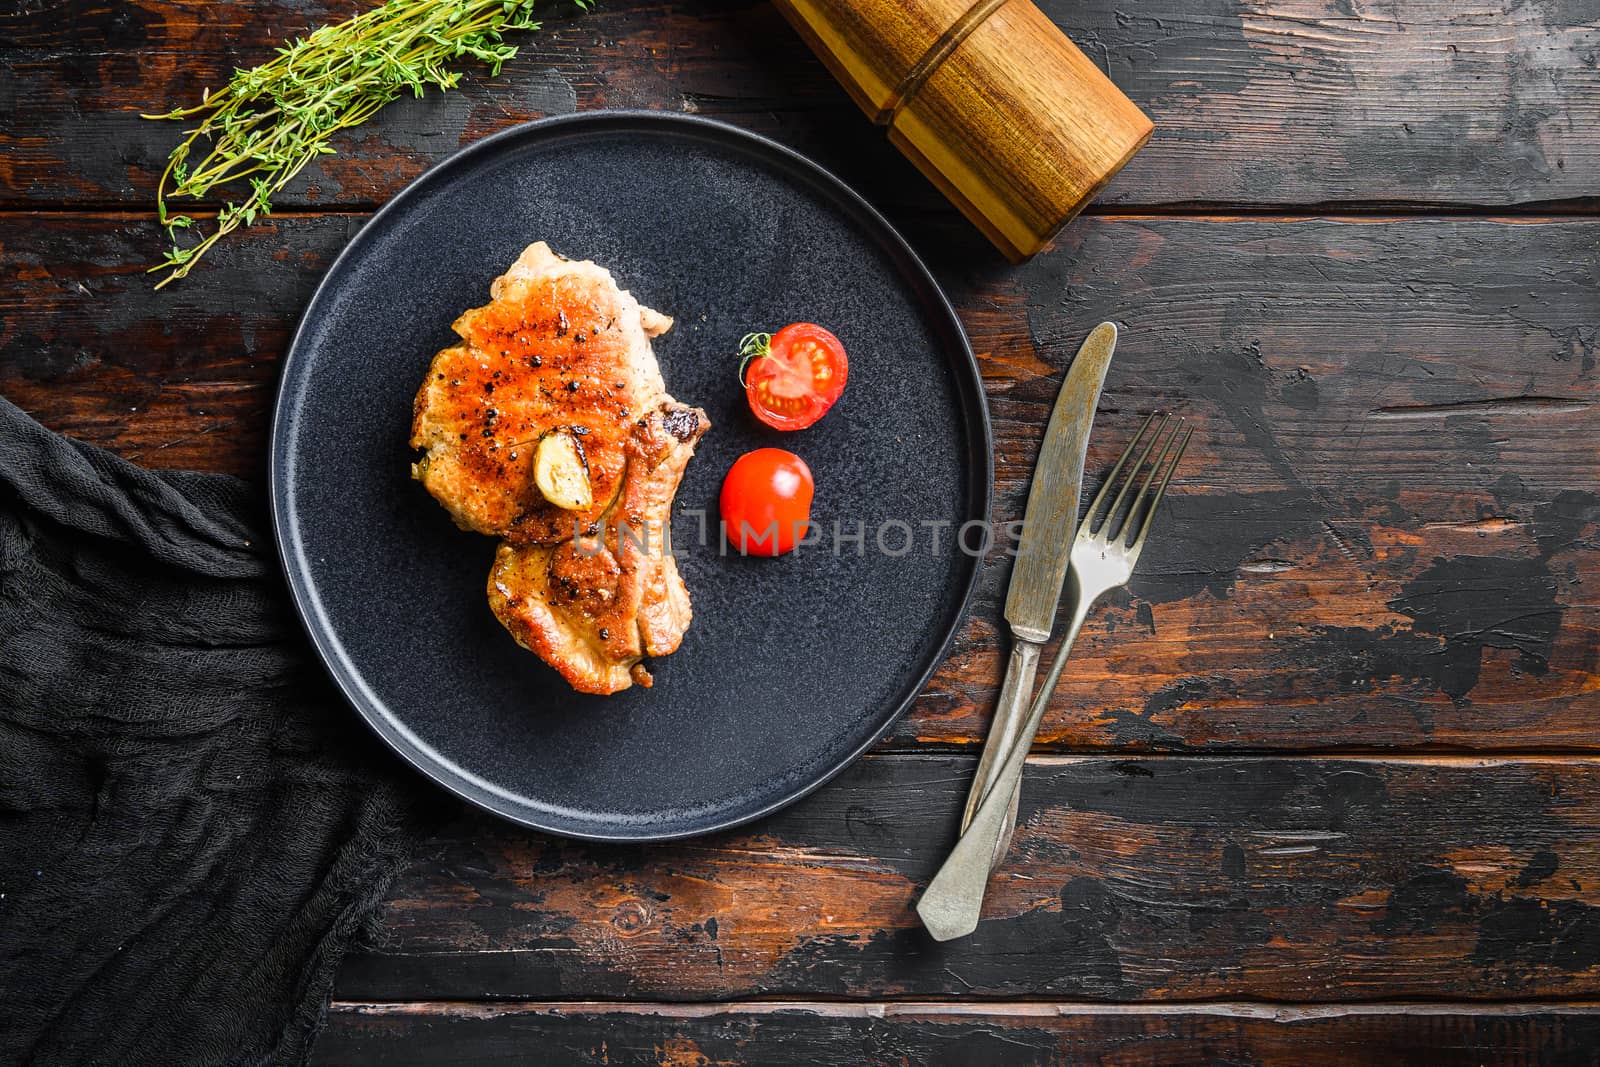 Dish of grilled pork chop with tomatoes top view with knife and fork over old rustic dark wood table table top view. Space for text.